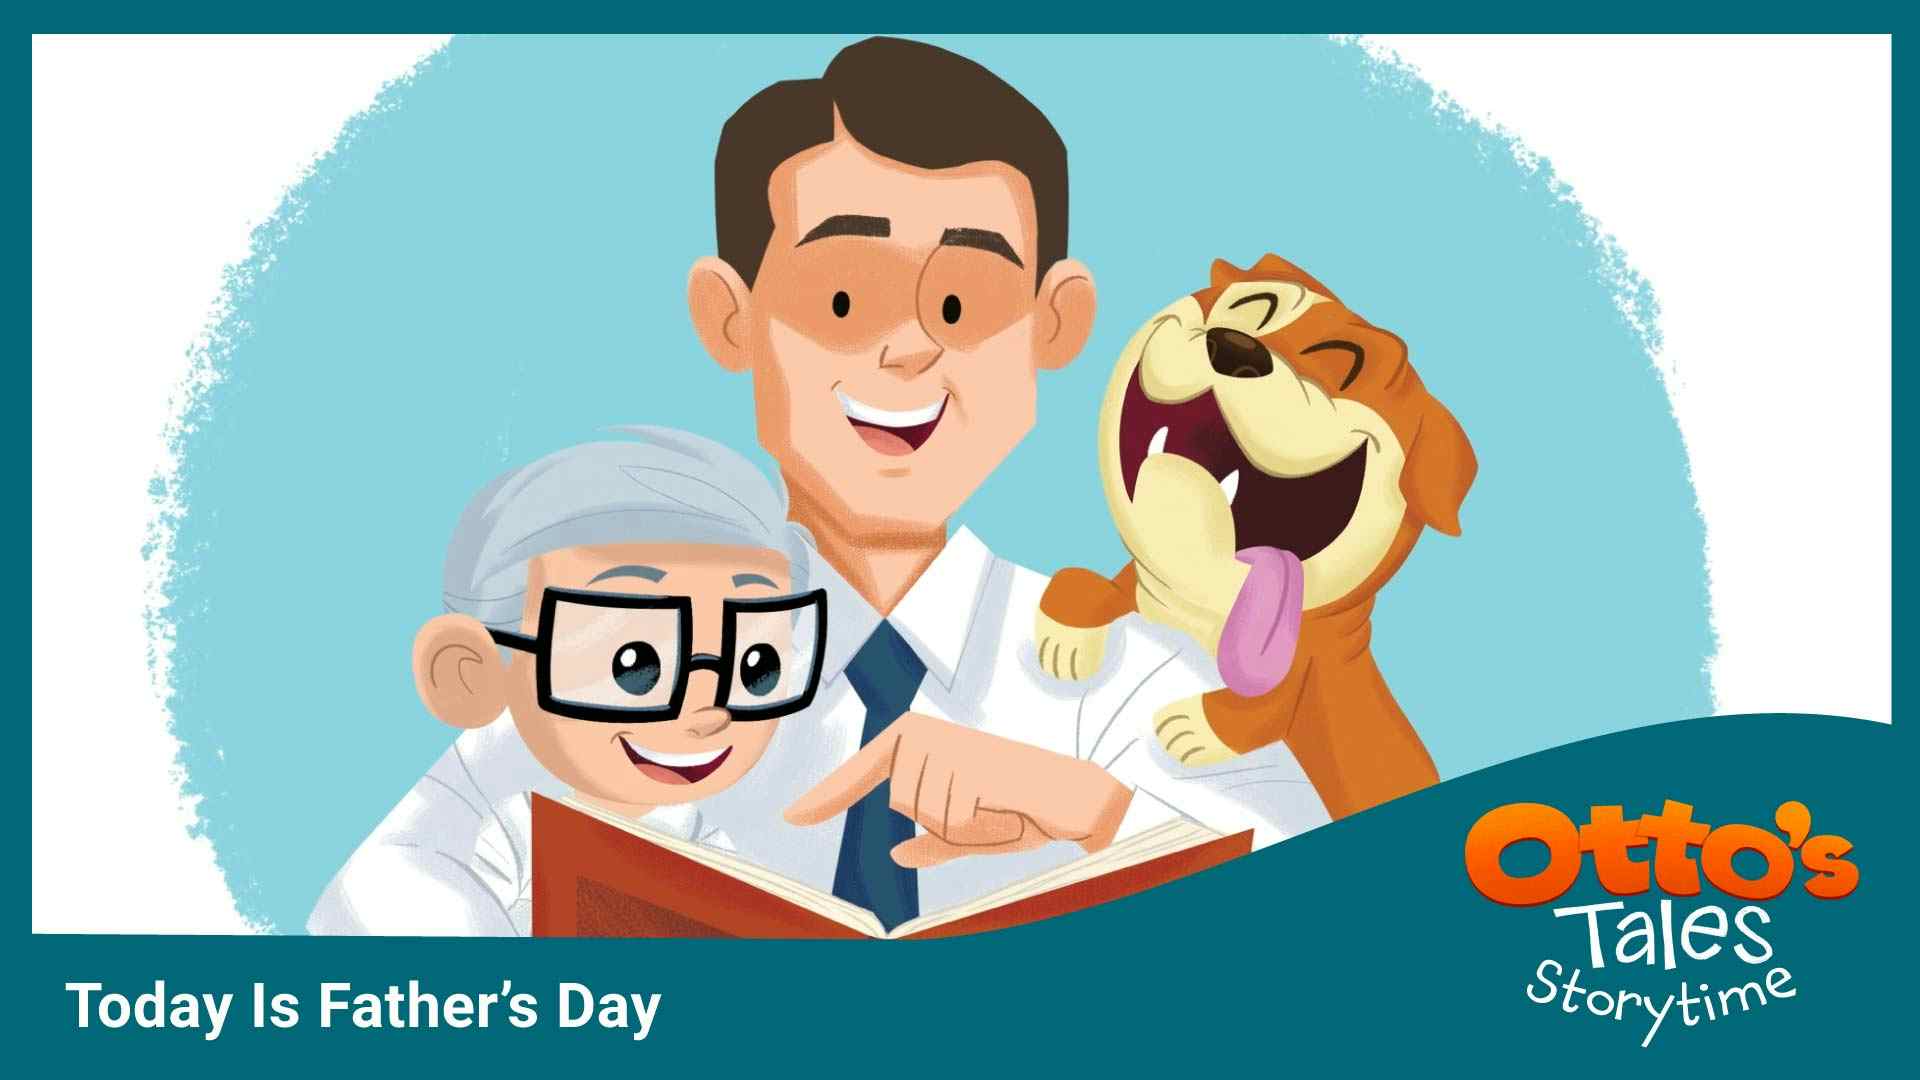 Today Is Father's Day